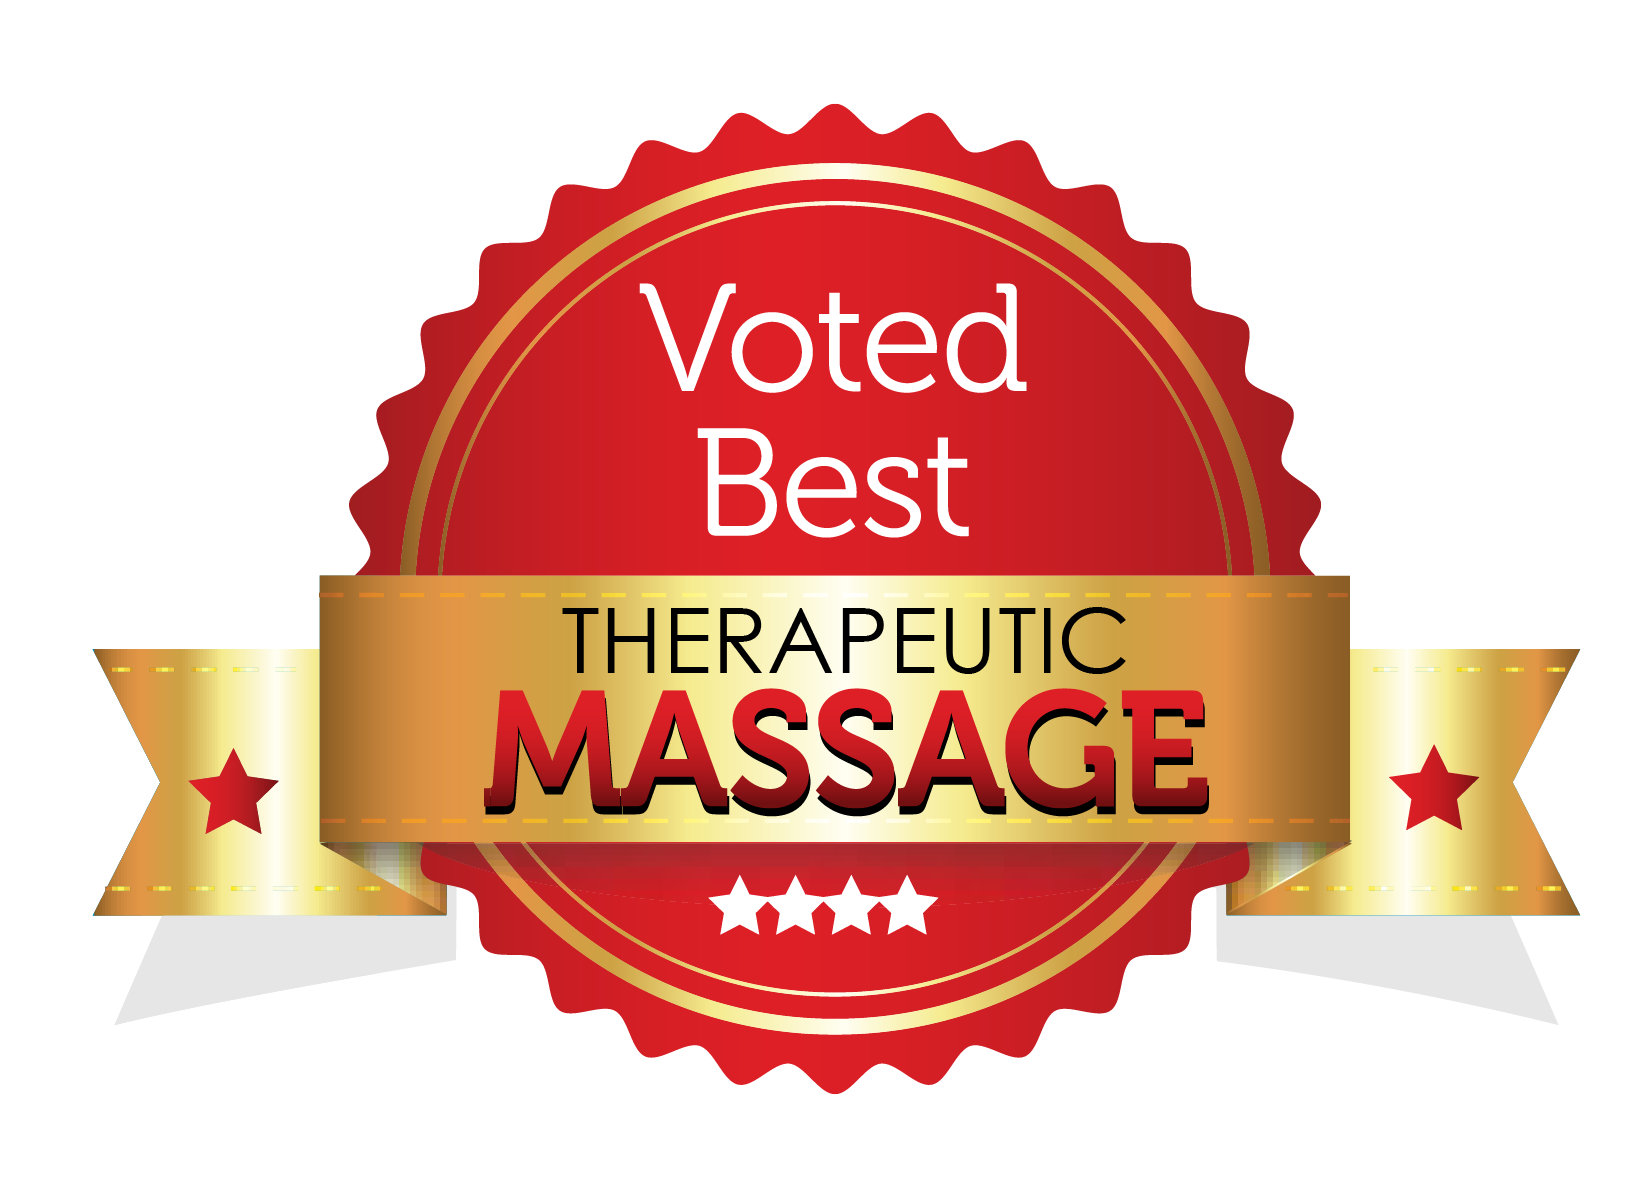 Voted Best Therapeutic Massage